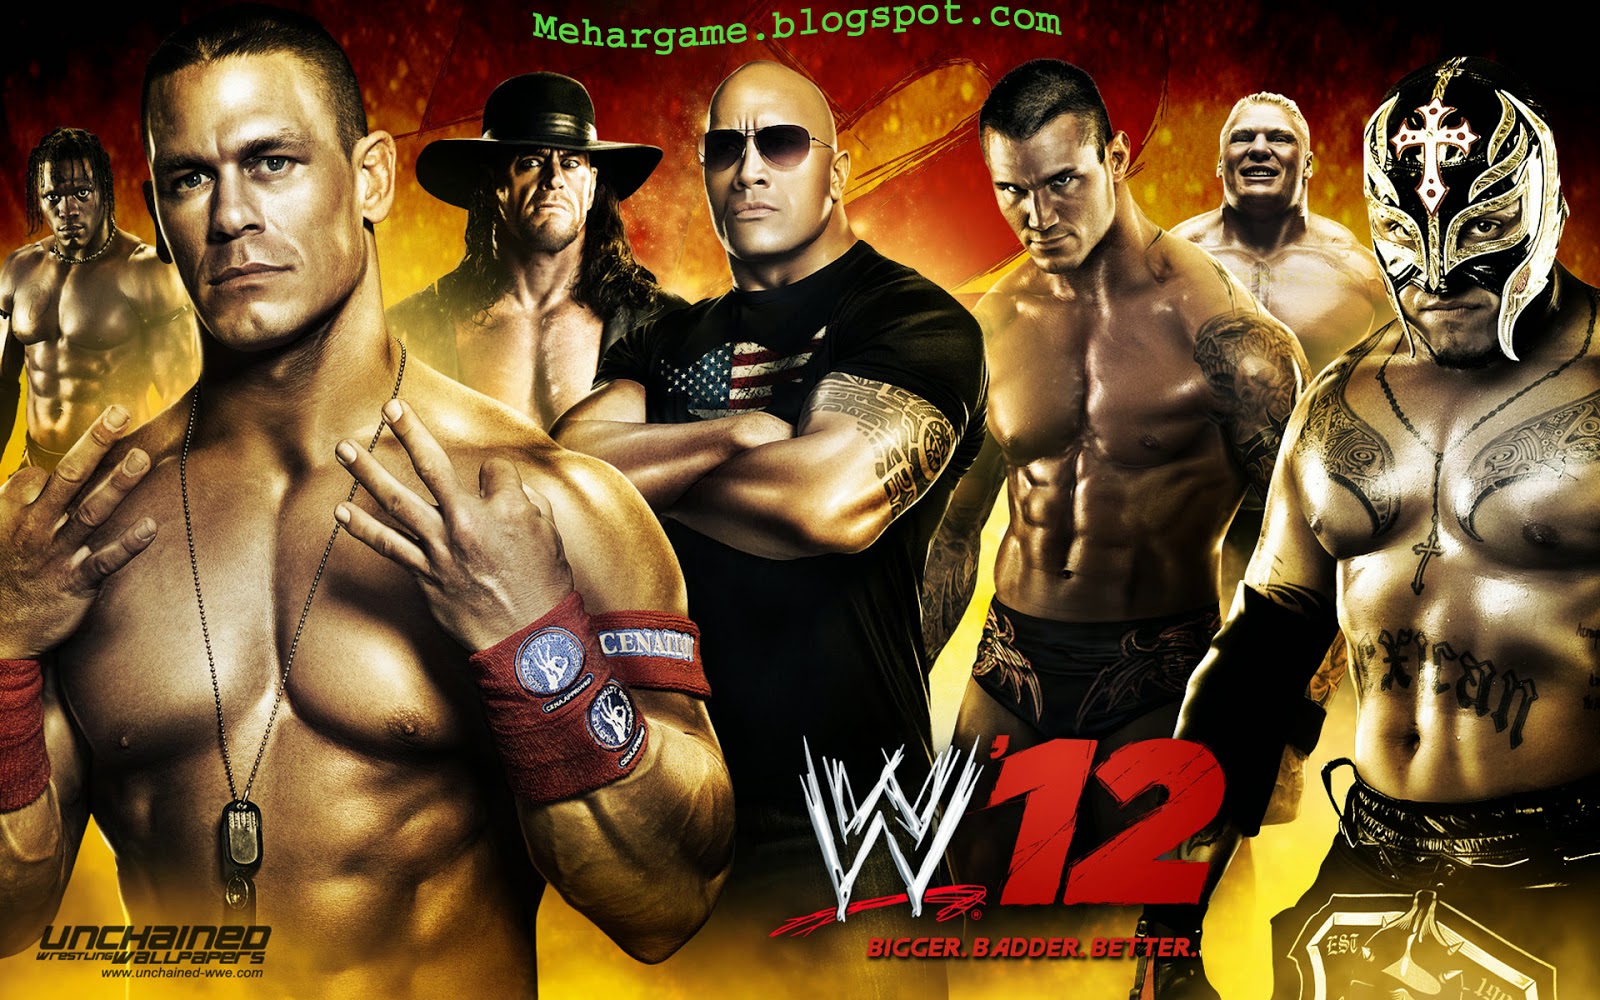 Wwe Wrestling 2012 PC Game Dowlode with Highl Compressed | Download